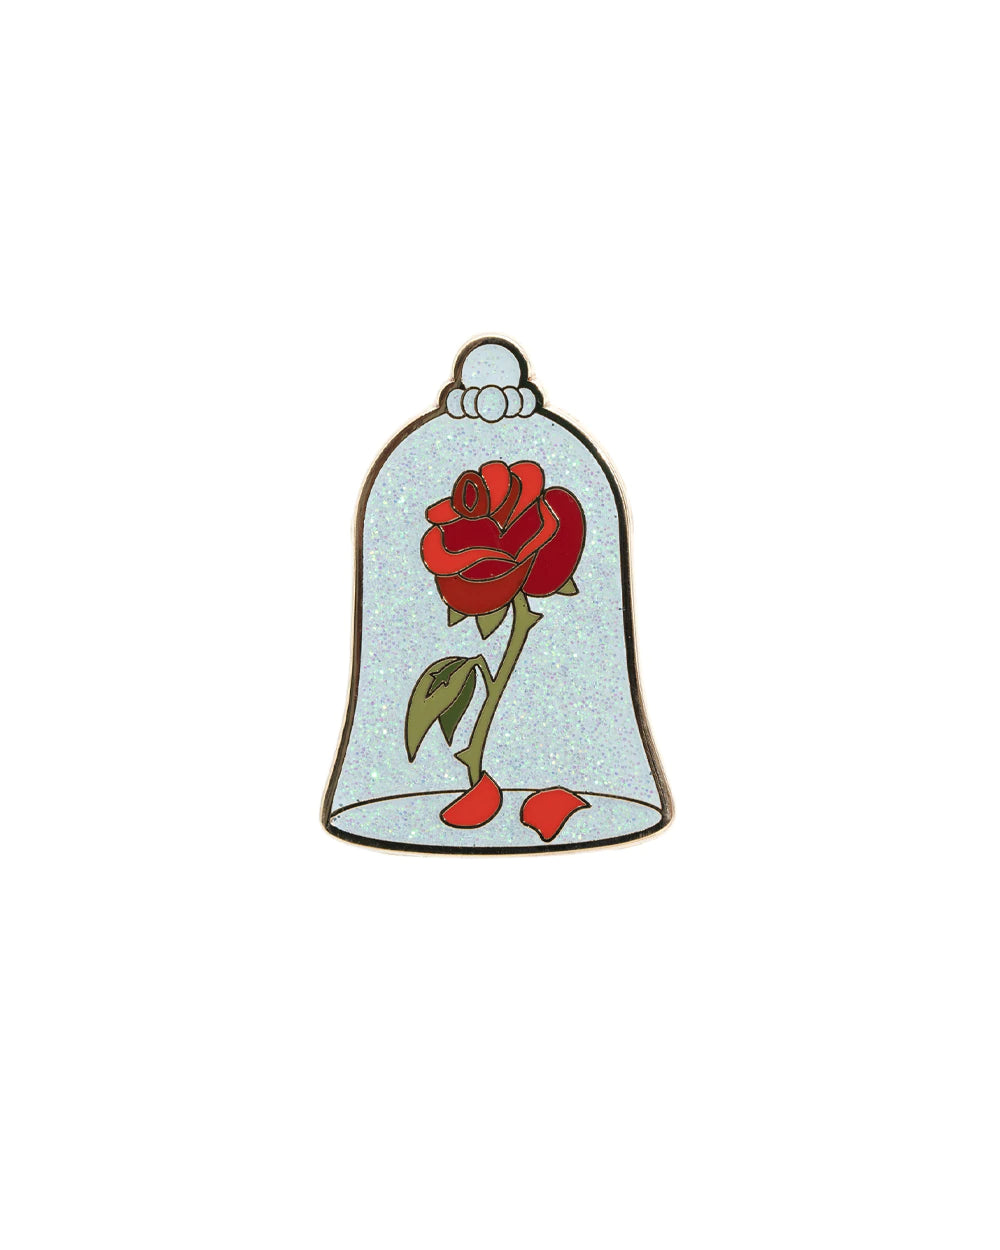 Disney Beauty And The Beast Enchanted Rose Collectible Pin Limited Edition